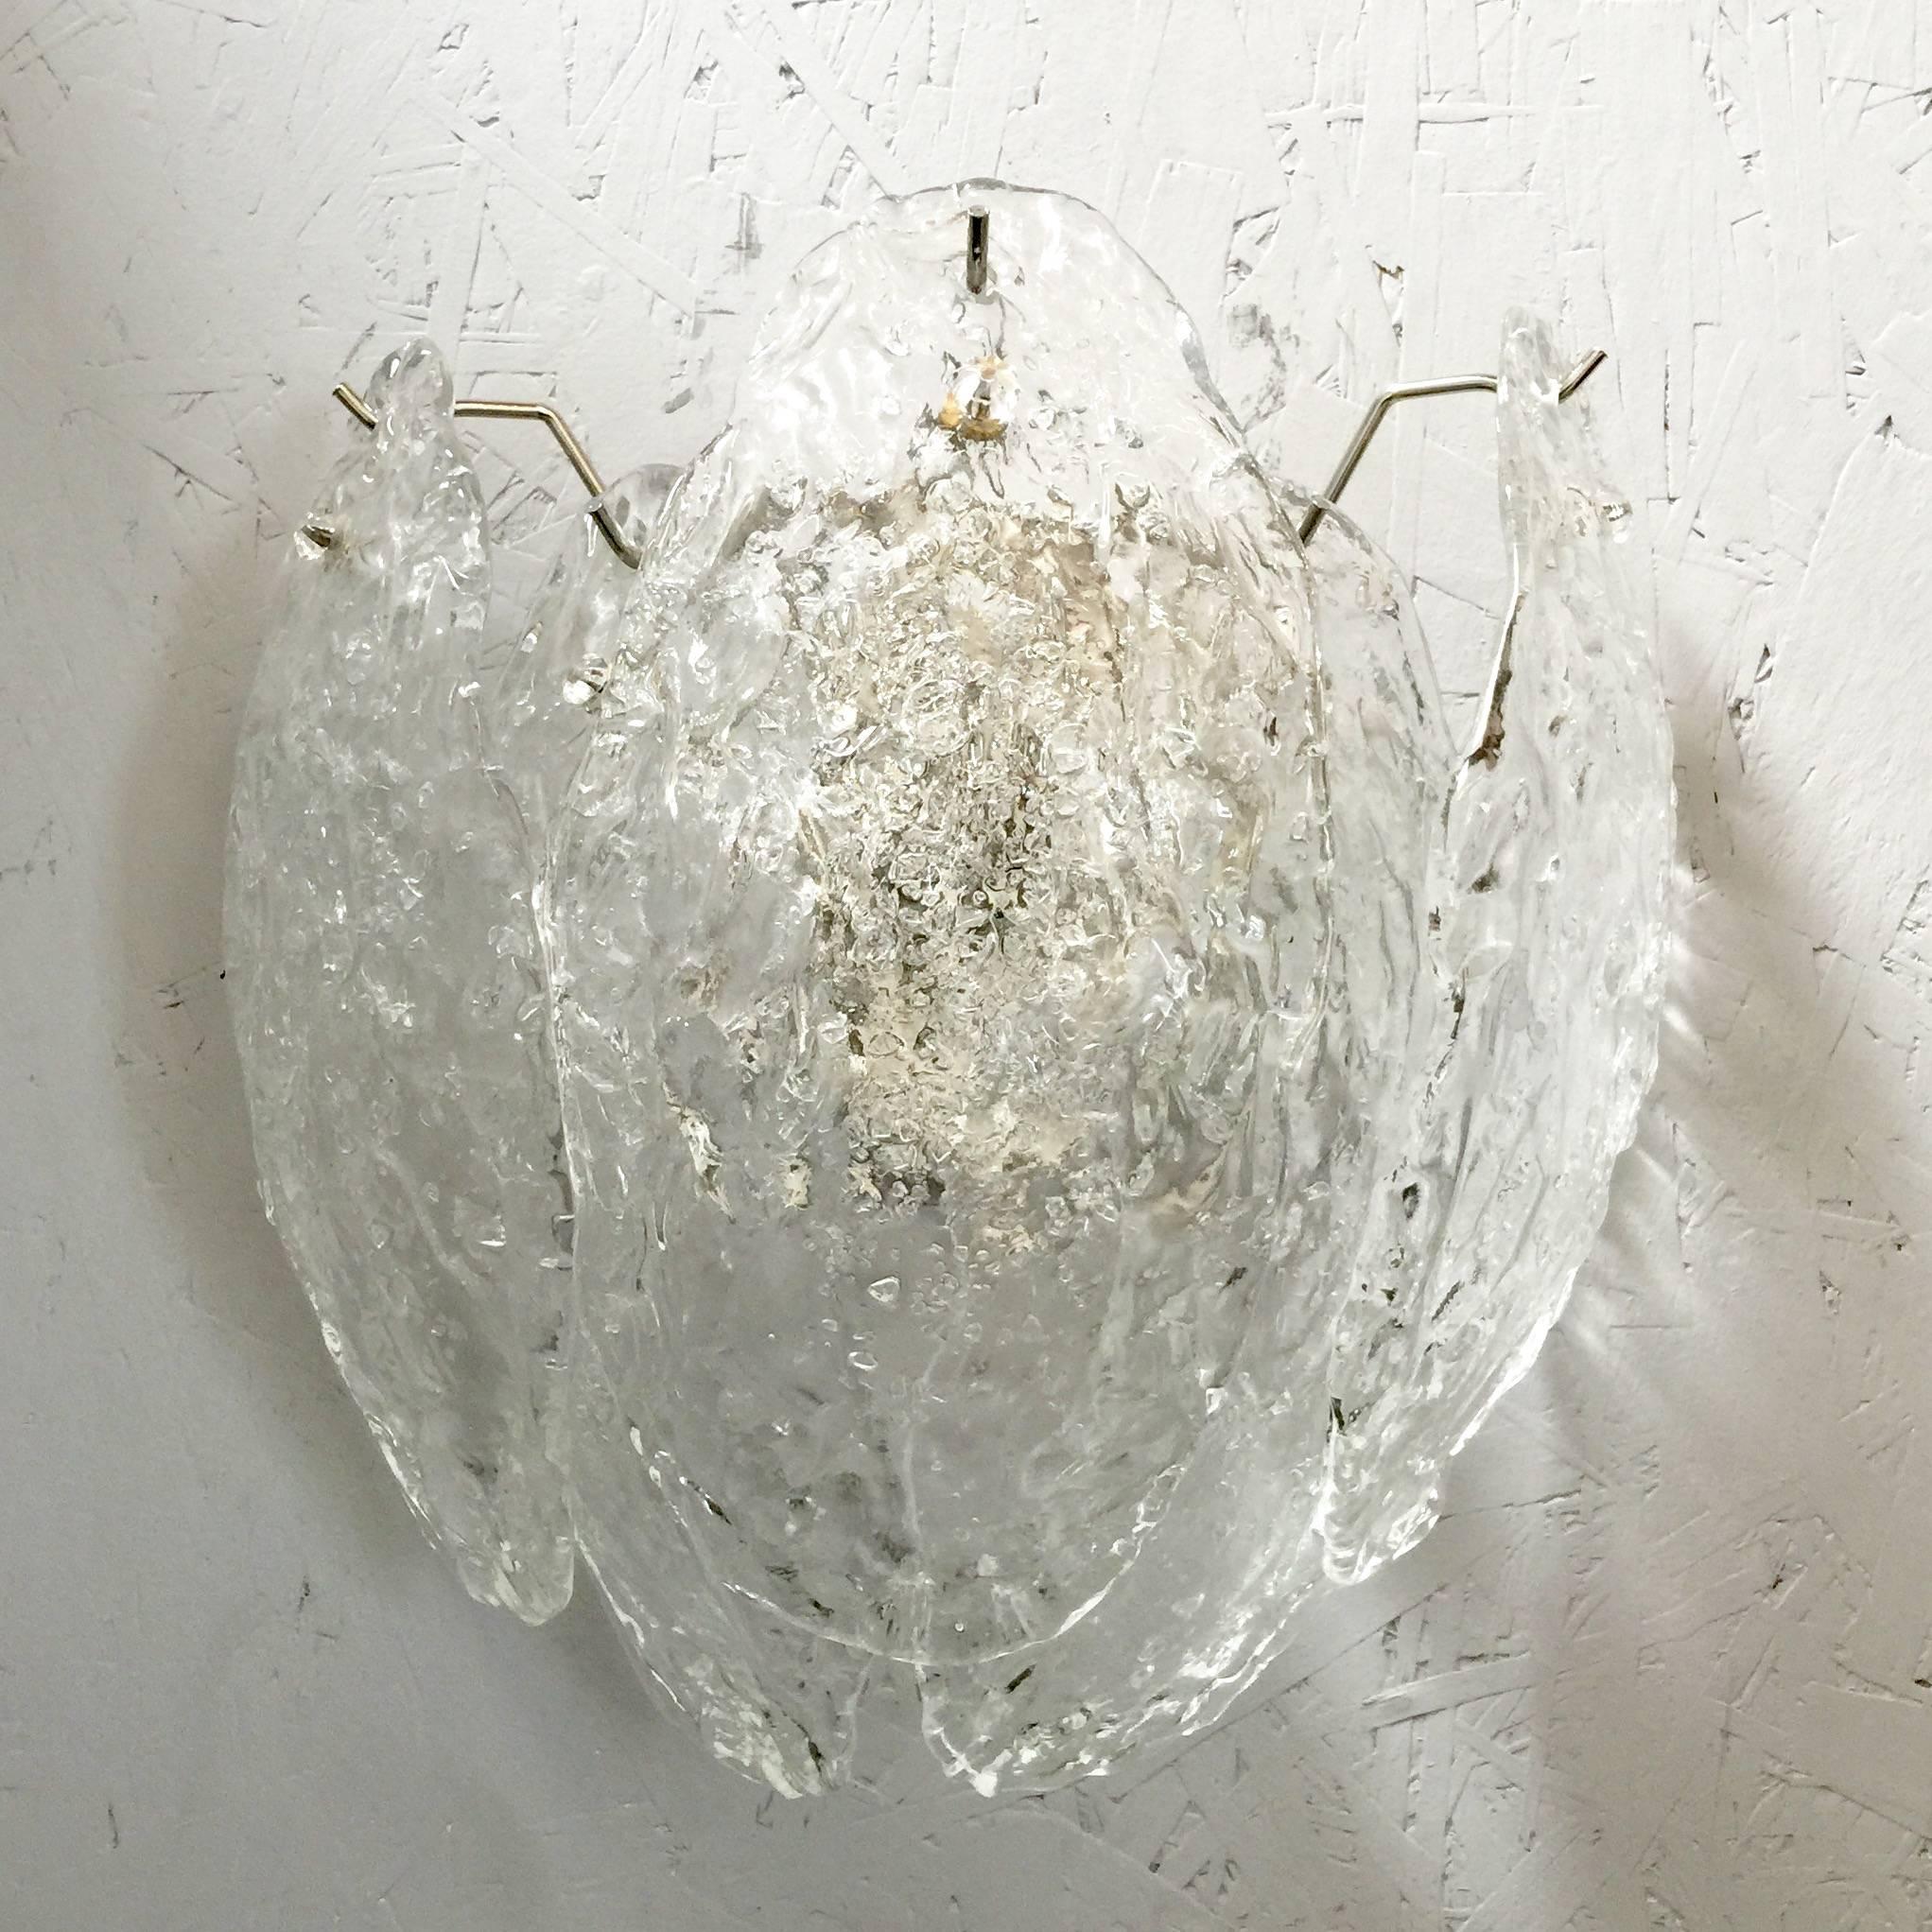 Vintage Italian wall lights with clear Murano glass leaves mounted on nickel frames / Designd by Mazzega, circa 1960s / Made in Italy
2 lights / E26 or E27 type / max 60W each 
Height: 13 inches /  Width: 13 inches / Depth: 7 inches
1 pair in stock